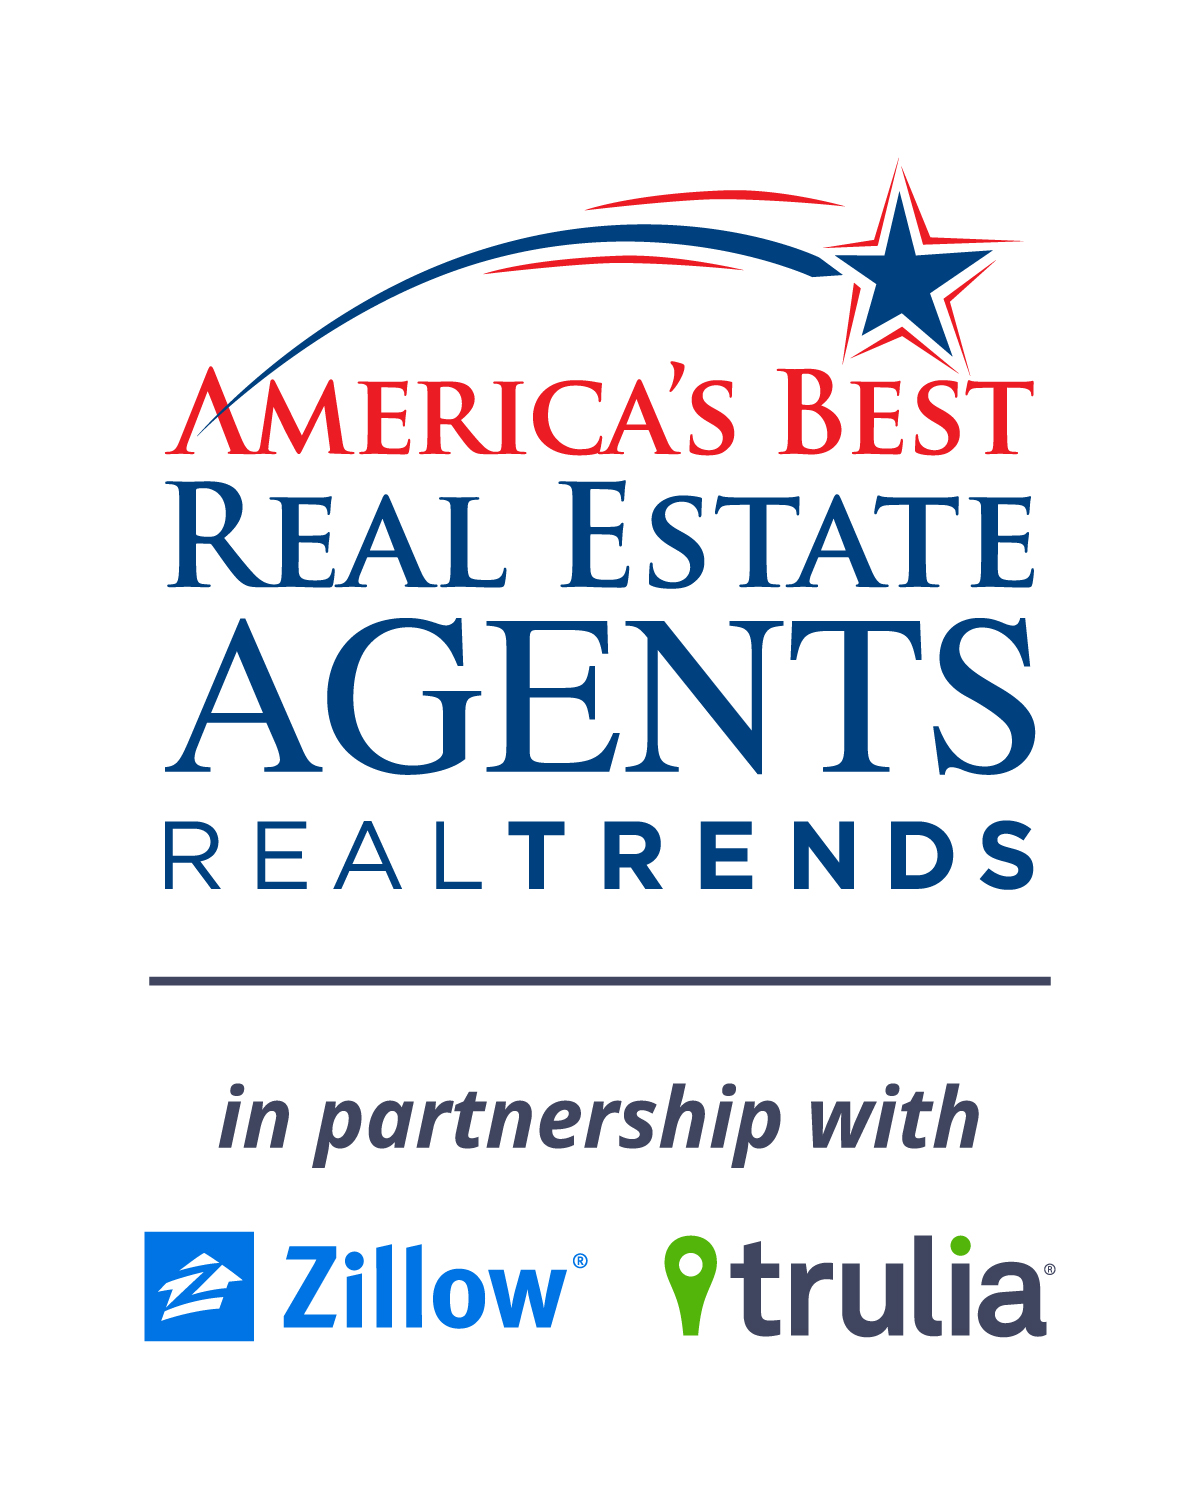 John Beran Recognized as Top 1% of Real Estate Agents in the United States